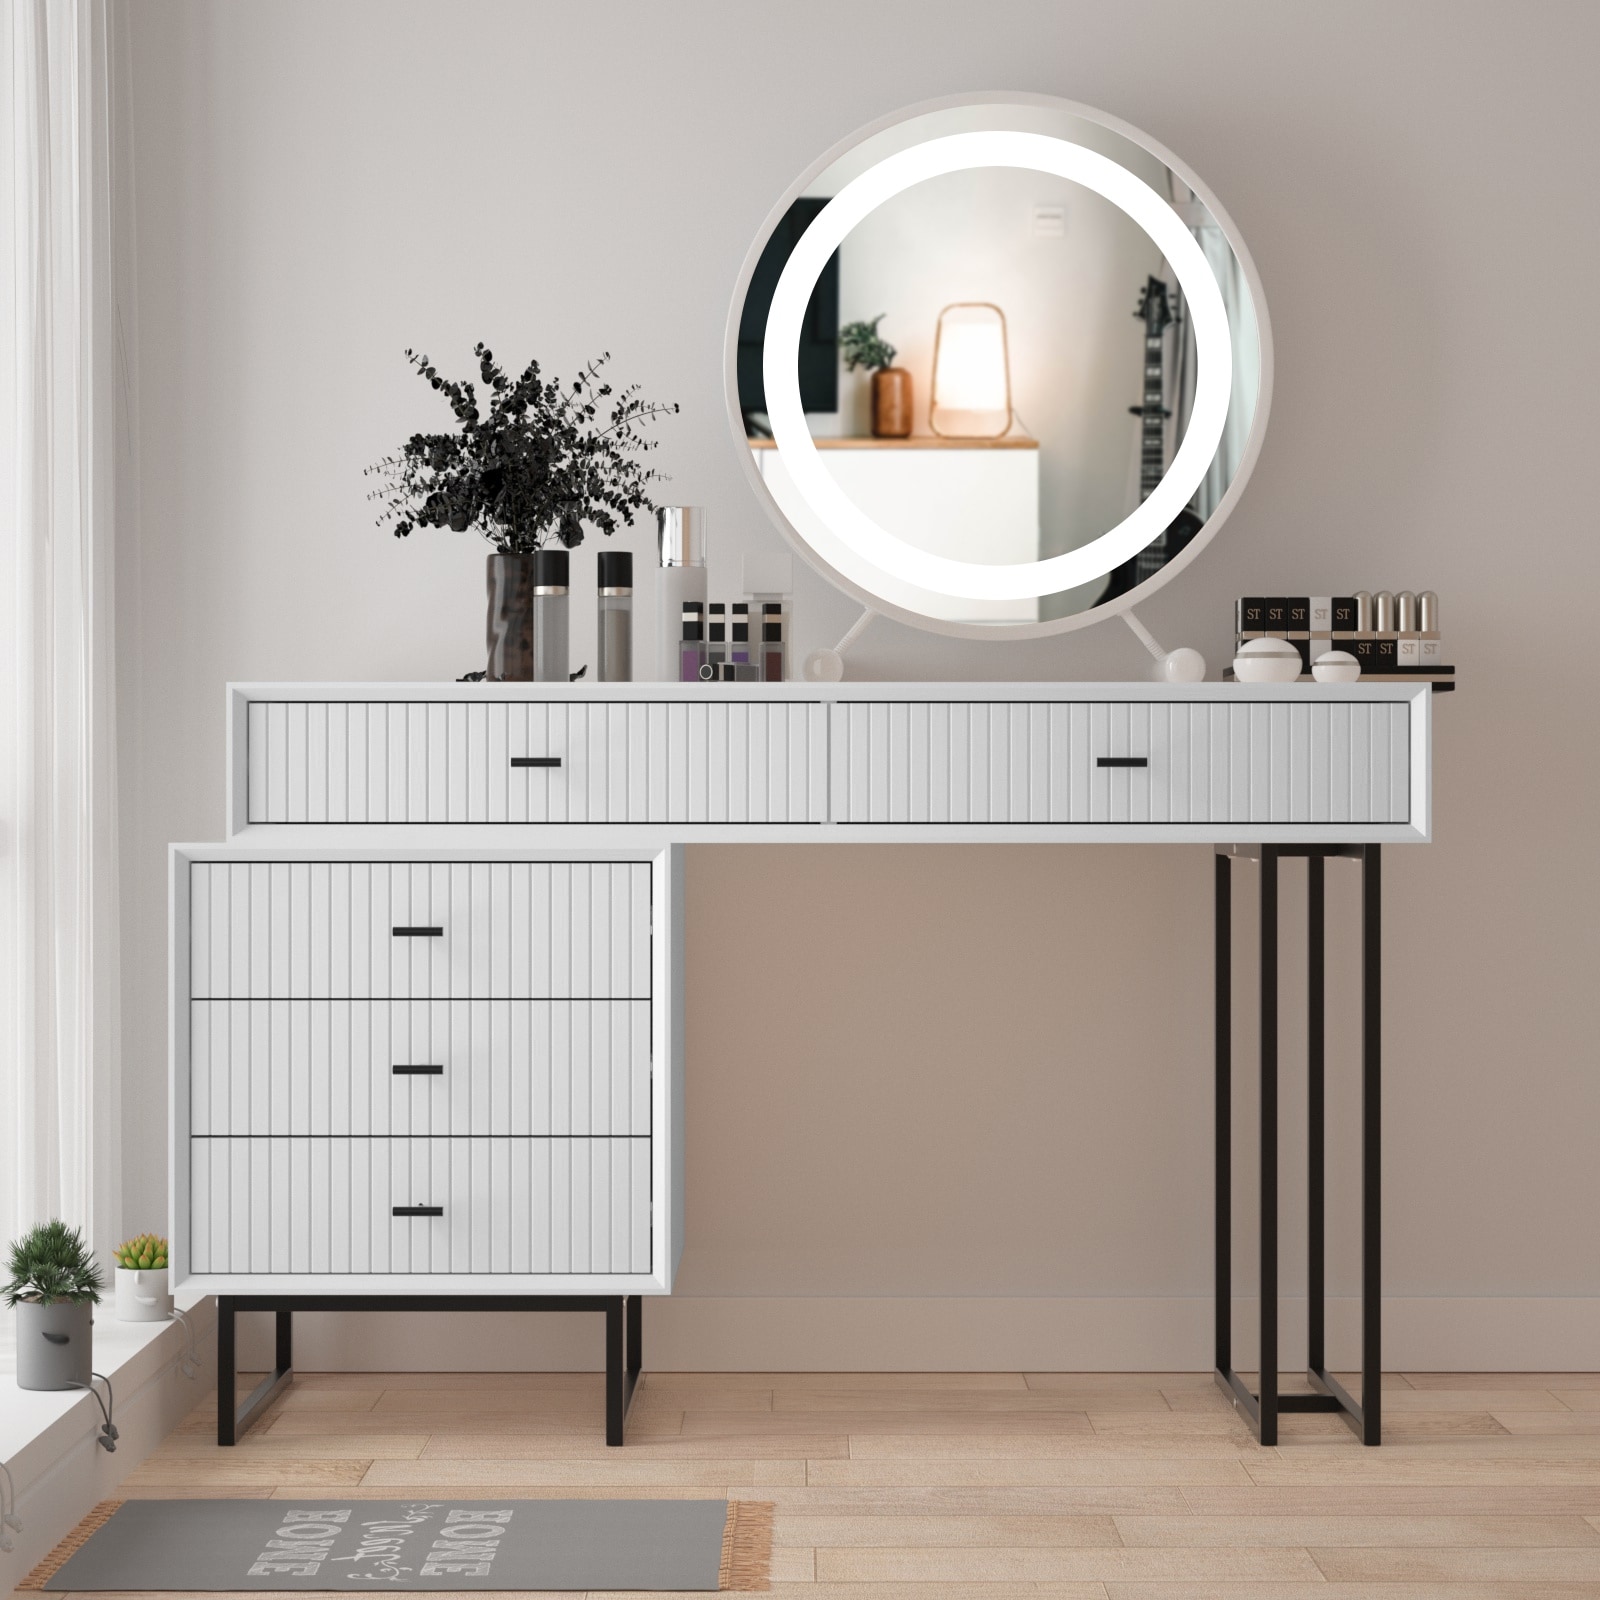 https://ak1.ostkcdn.com/images/products/is/images/direct/51c644b8d5fbac33deab115c0724ce3b594eb65f/Makeup-Vanity-Desk-Set-with-Drawers%2C-Storage-Dresser-Dressing-Table-for-Bedroom.jpg